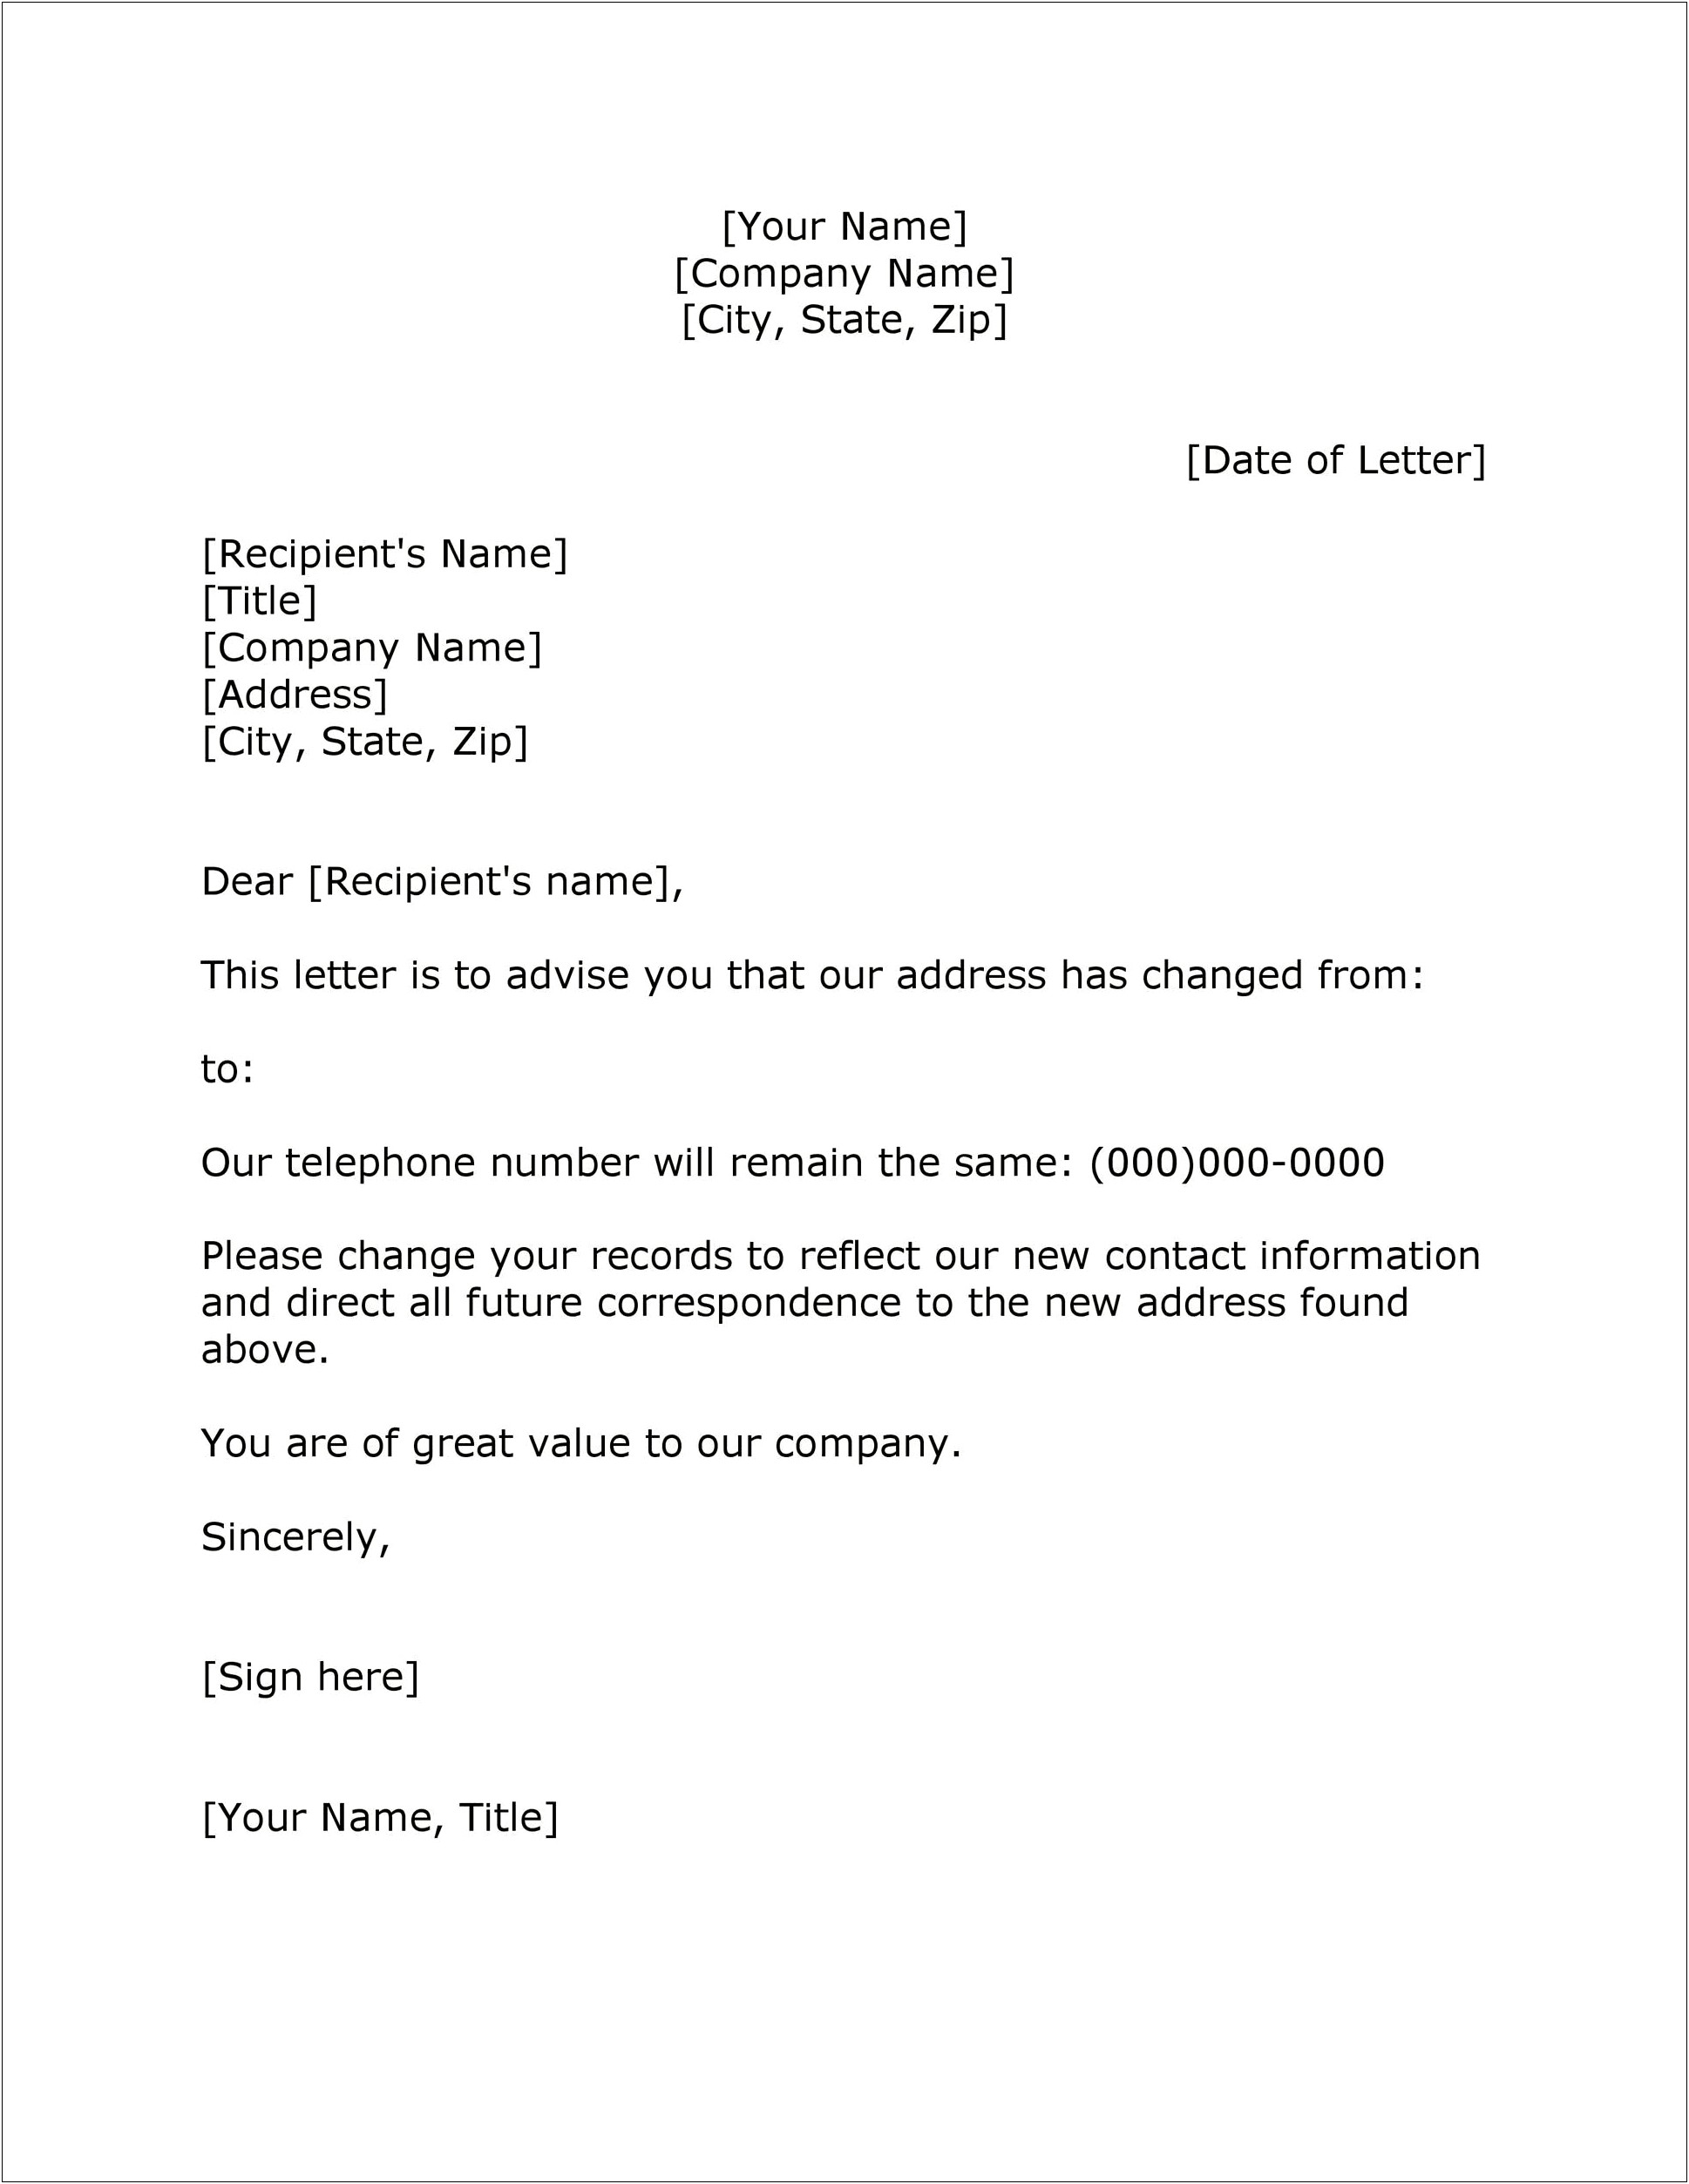 Business Letter Template For Changeof Address